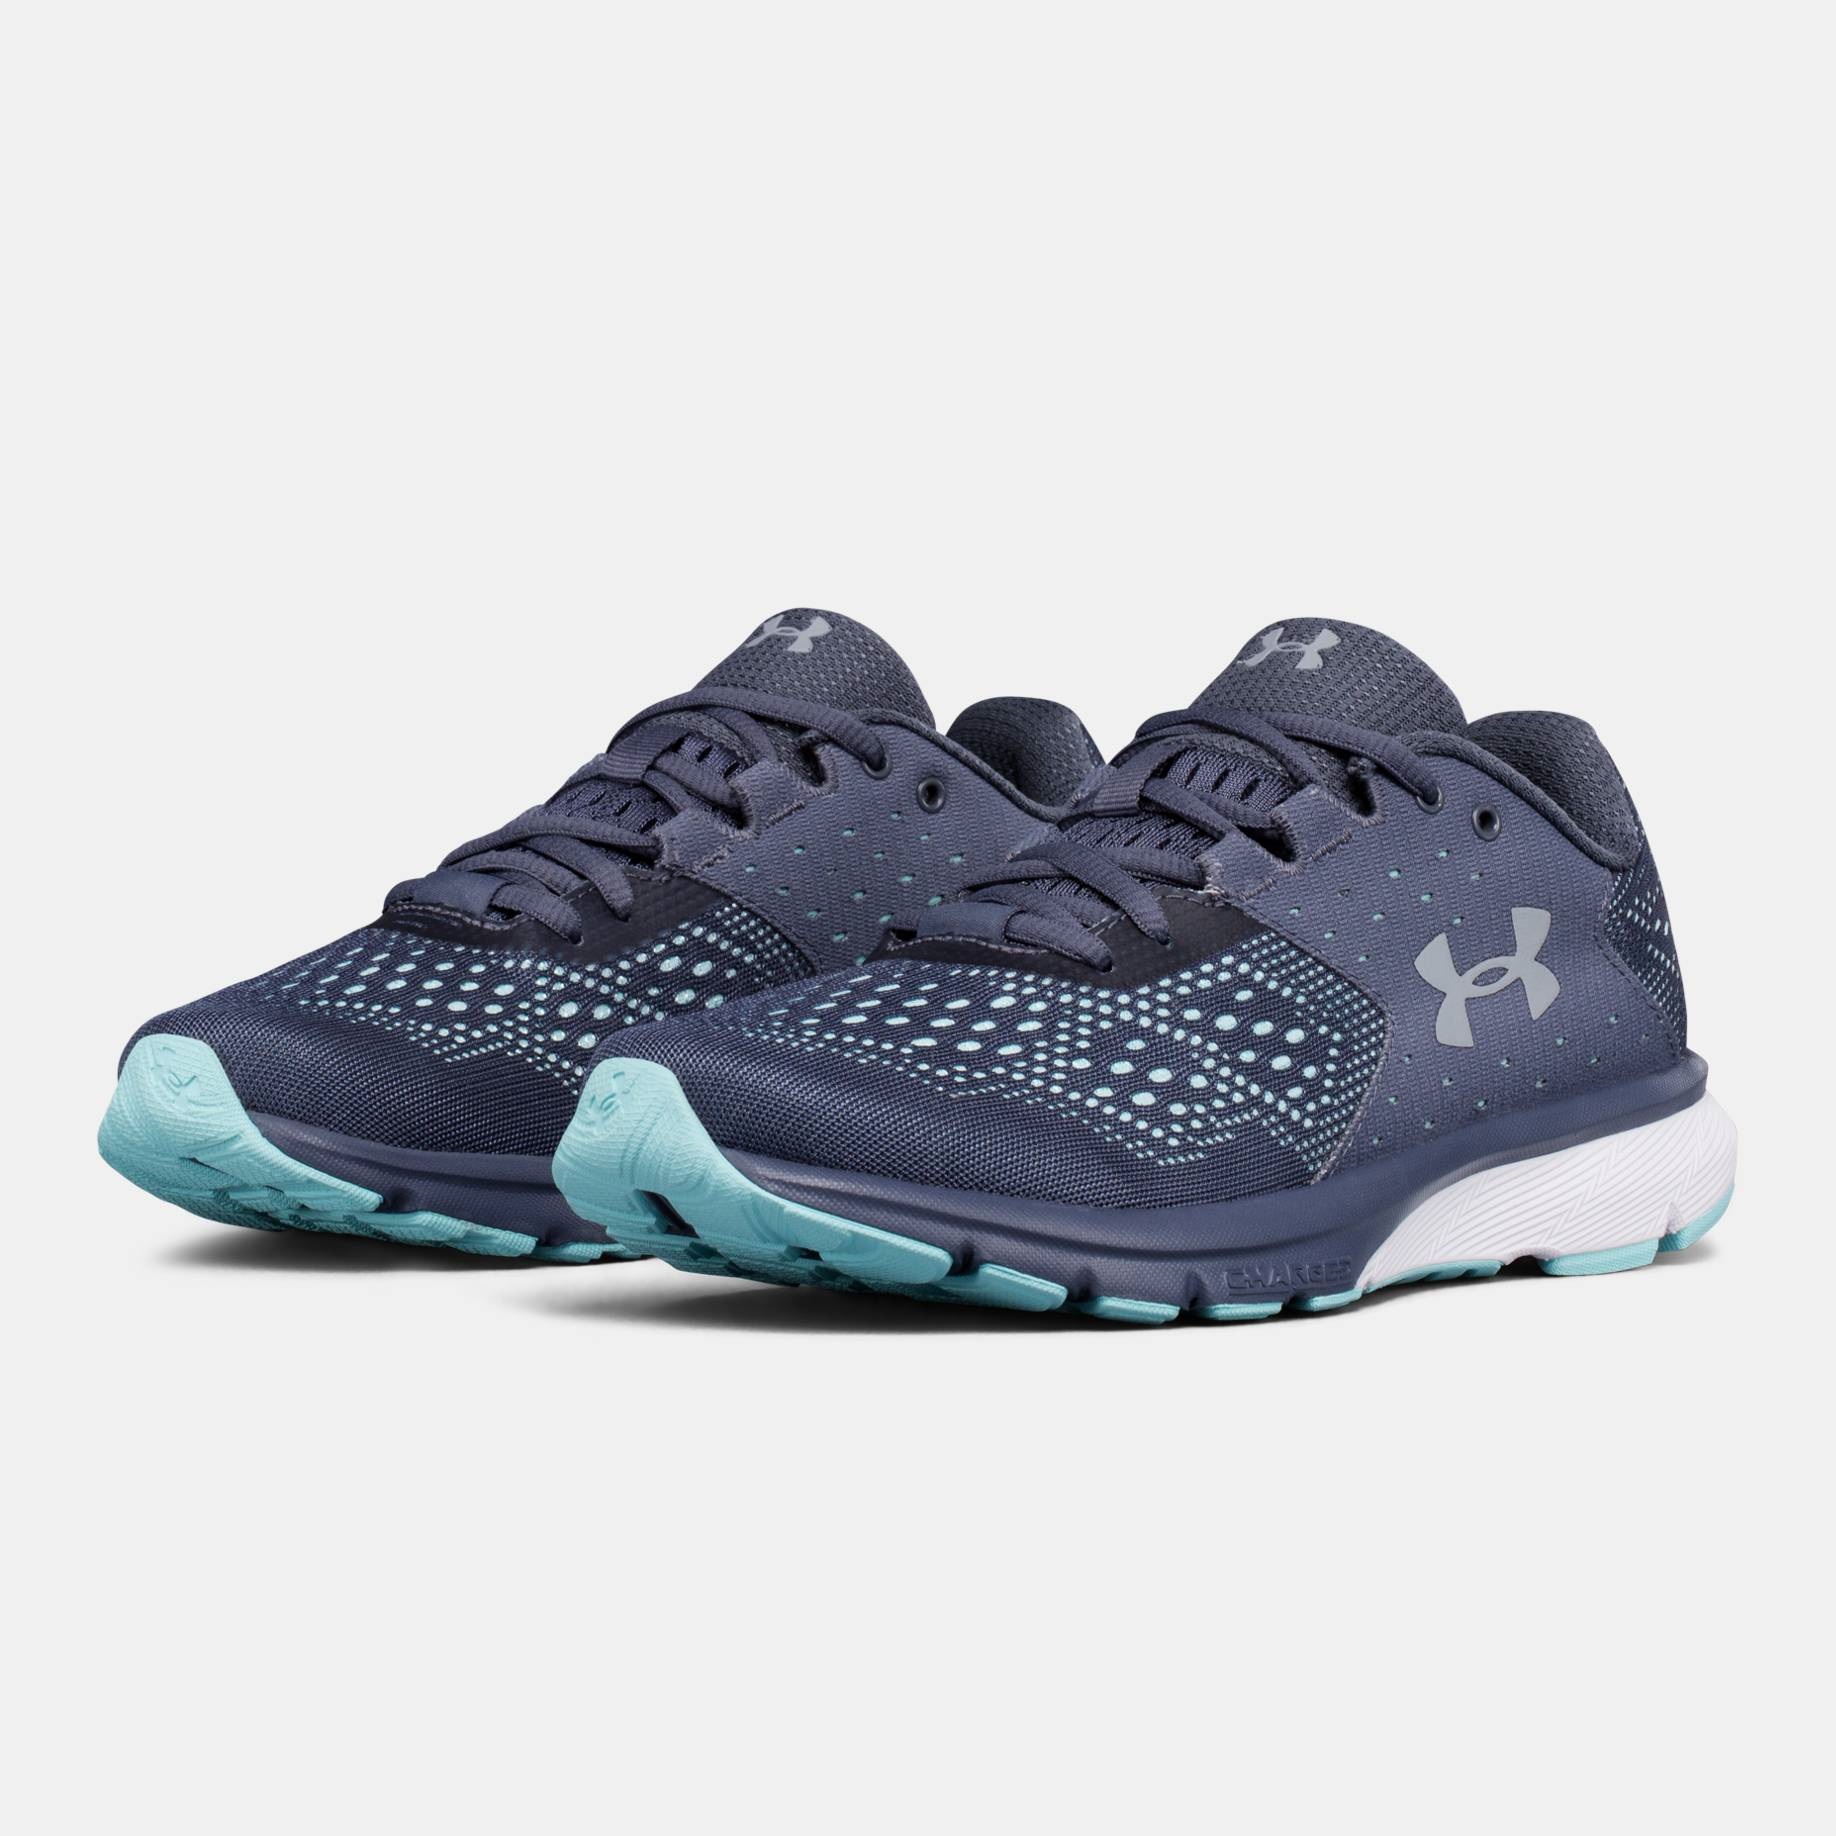 Under Armour Charged Rebel Trainers Women's Running Shoes Sports Sneakers 